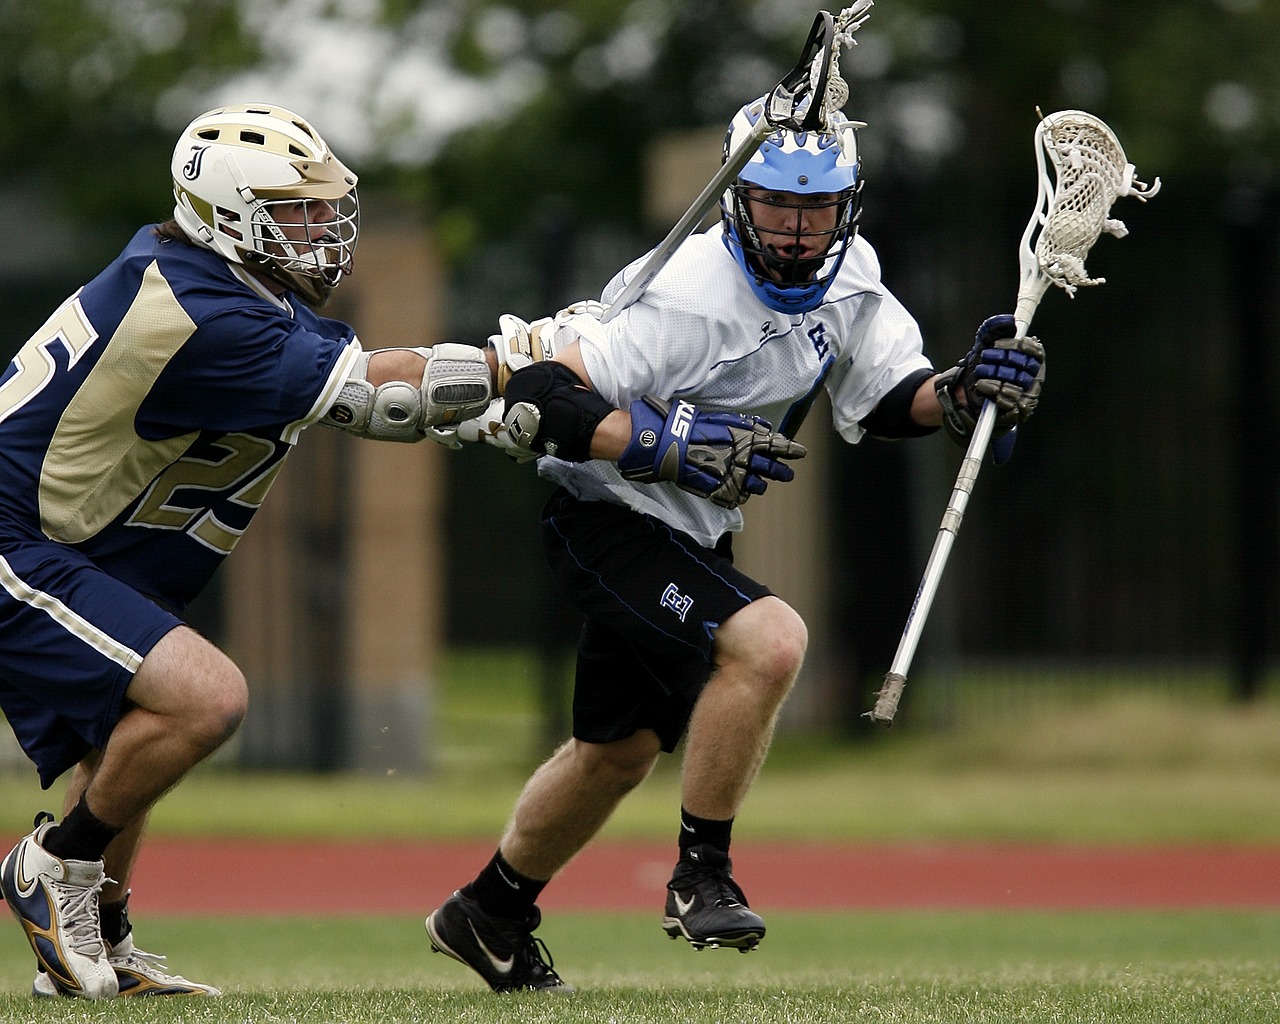 lacrosse action competition free photo